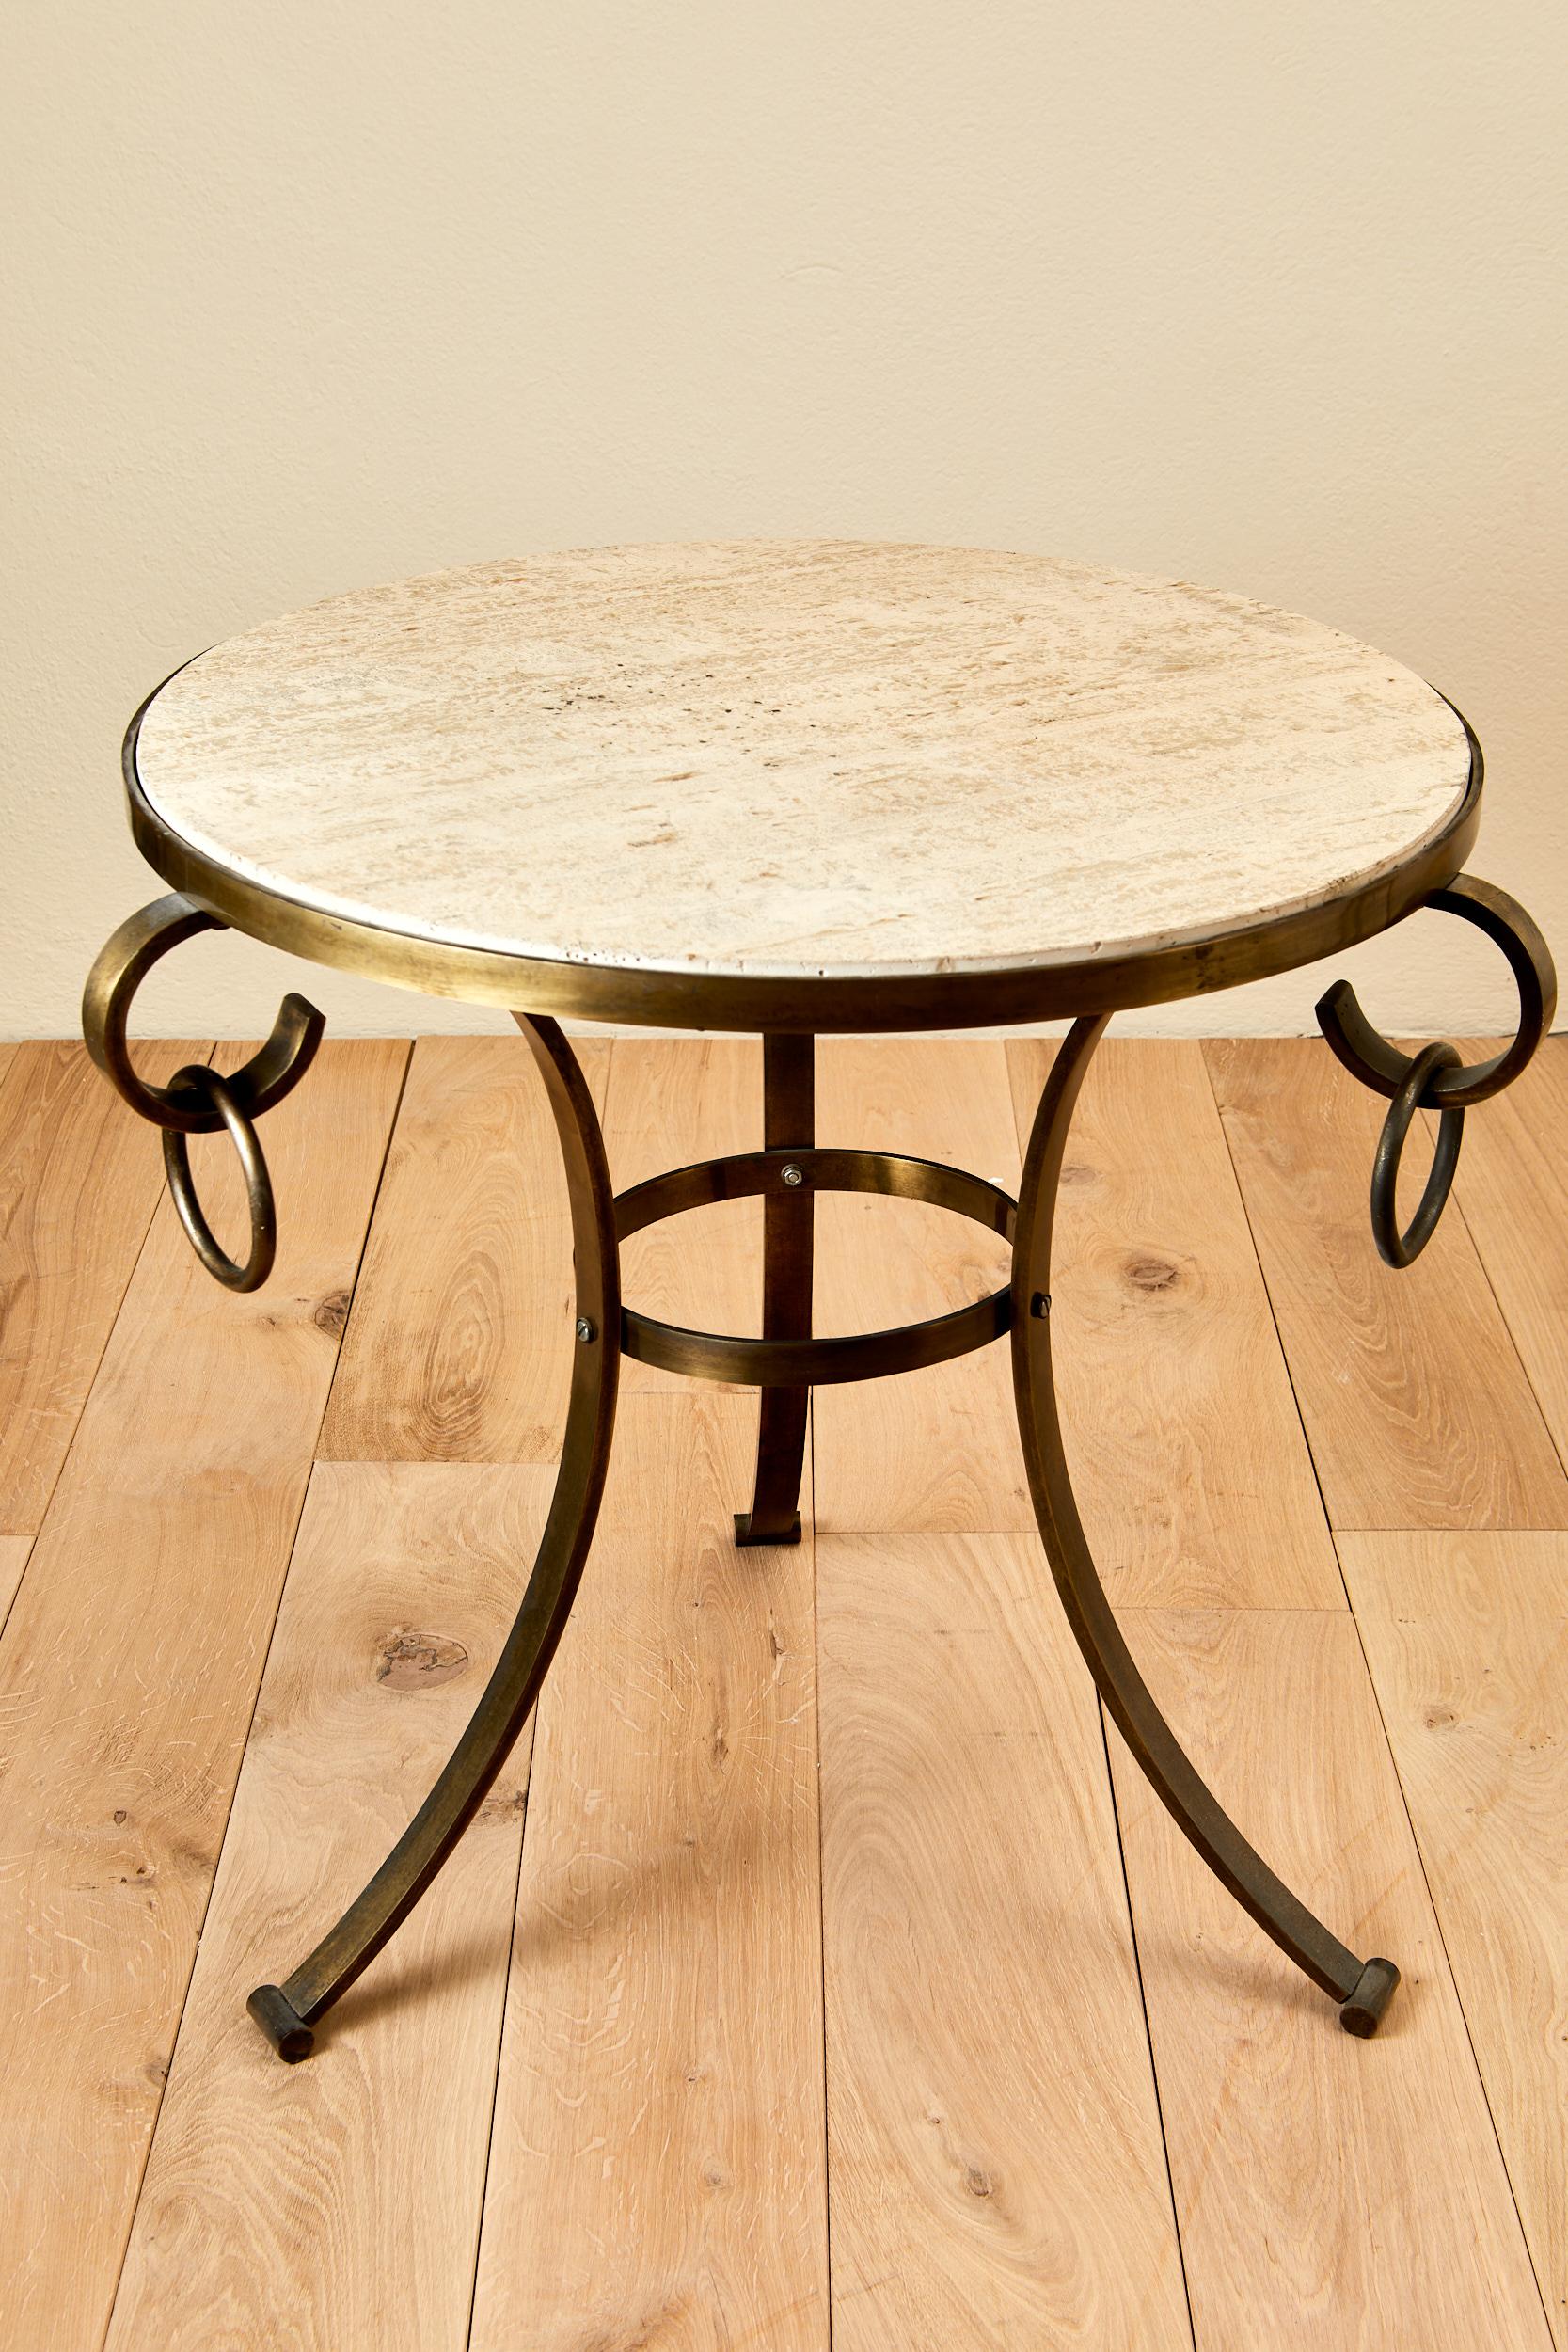 Mid-20th Century Pair of Neo Classic Pedestal Tables, Silver Iron and Brass Frame, Travertine Top